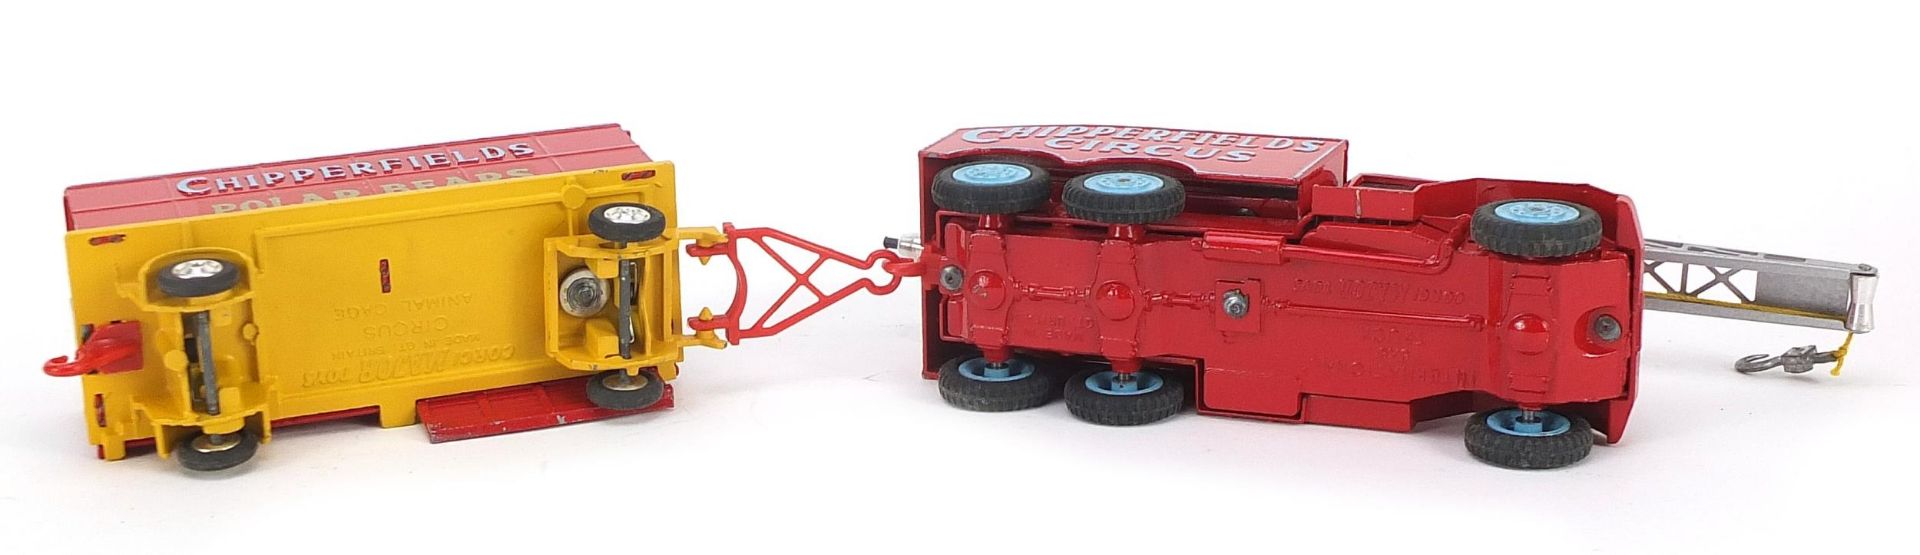 Corgi Toys Major Chipperfield's Circus crane, truck and cage with box, gift set no 12 - Image 4 of 5